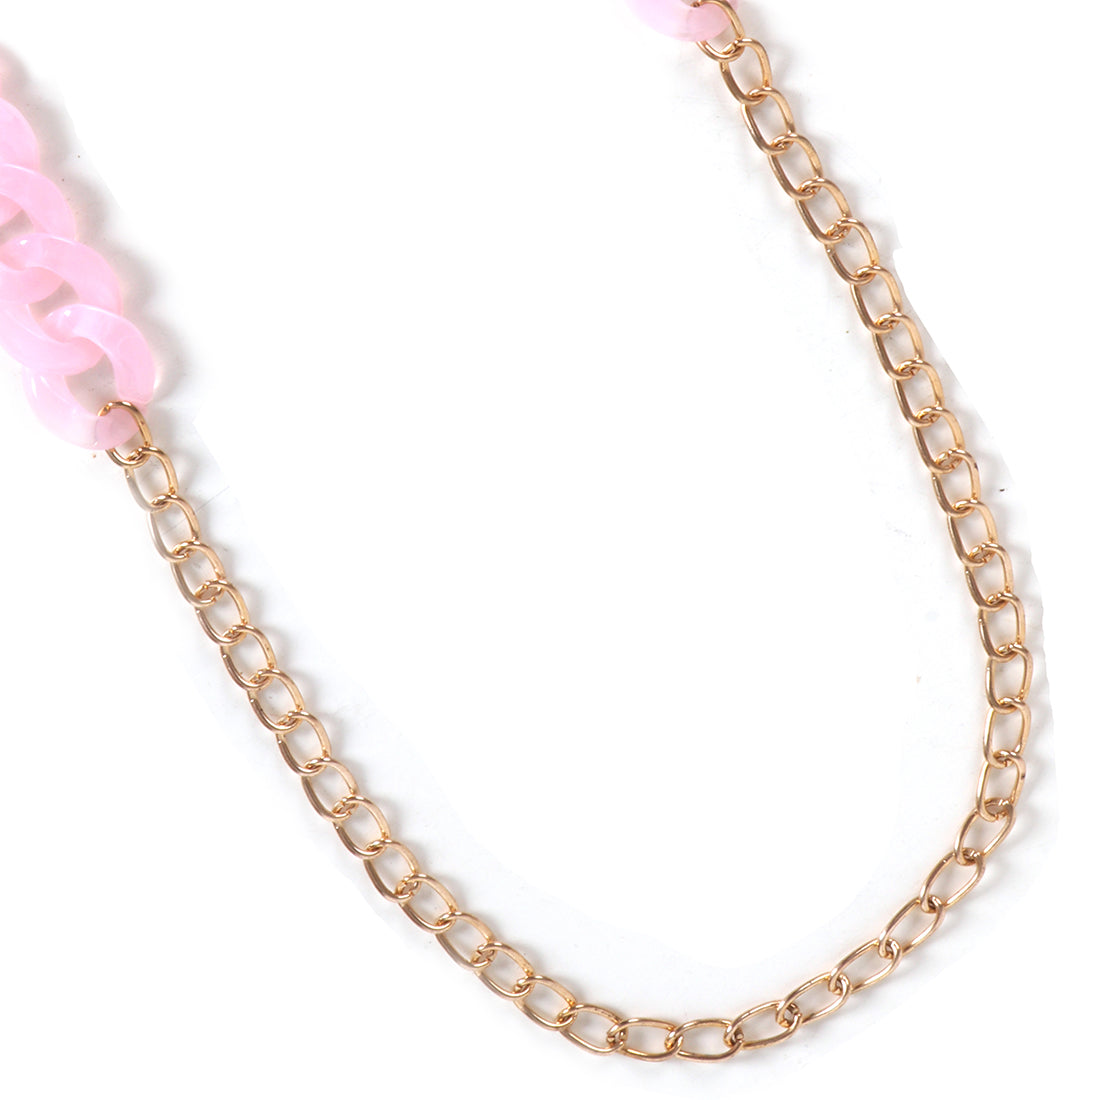 METALLIC GOLD-TONED CHAIN-LINK MARBLE PINK ACRYLIC MASK CHAIN OR SUNGLASS CHAIN